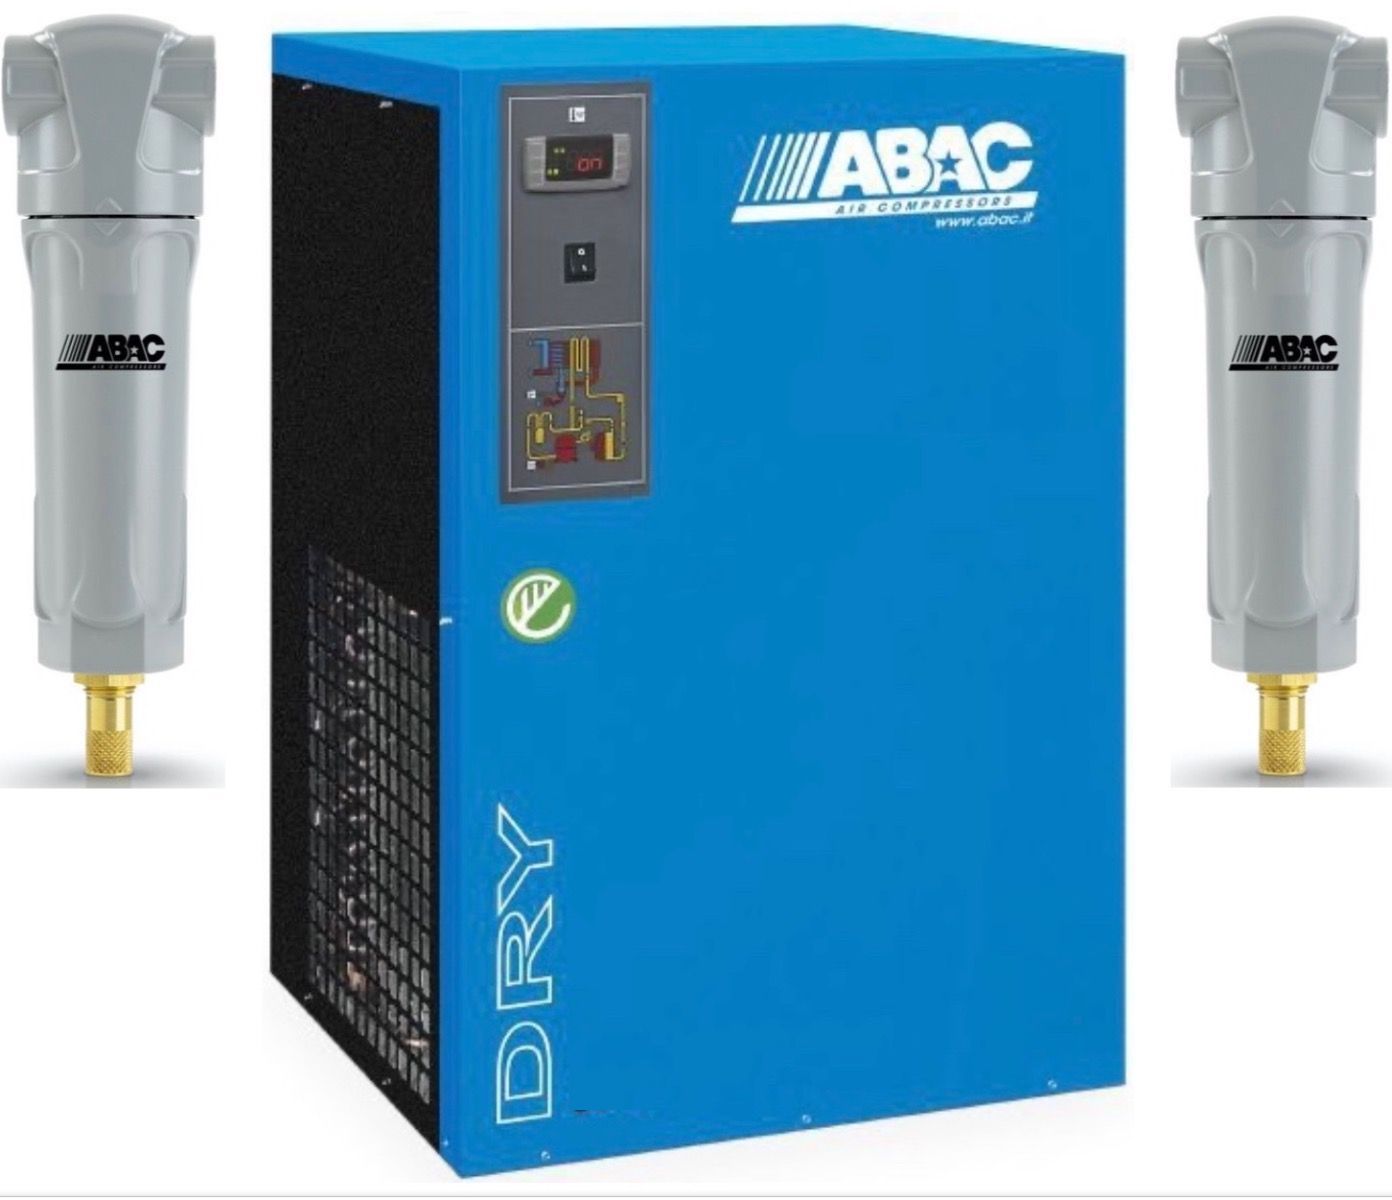 Abac Dry 360 230 Cfm Refrigerated Dryer - 4102005407 + 2 X Filters Compressed Air